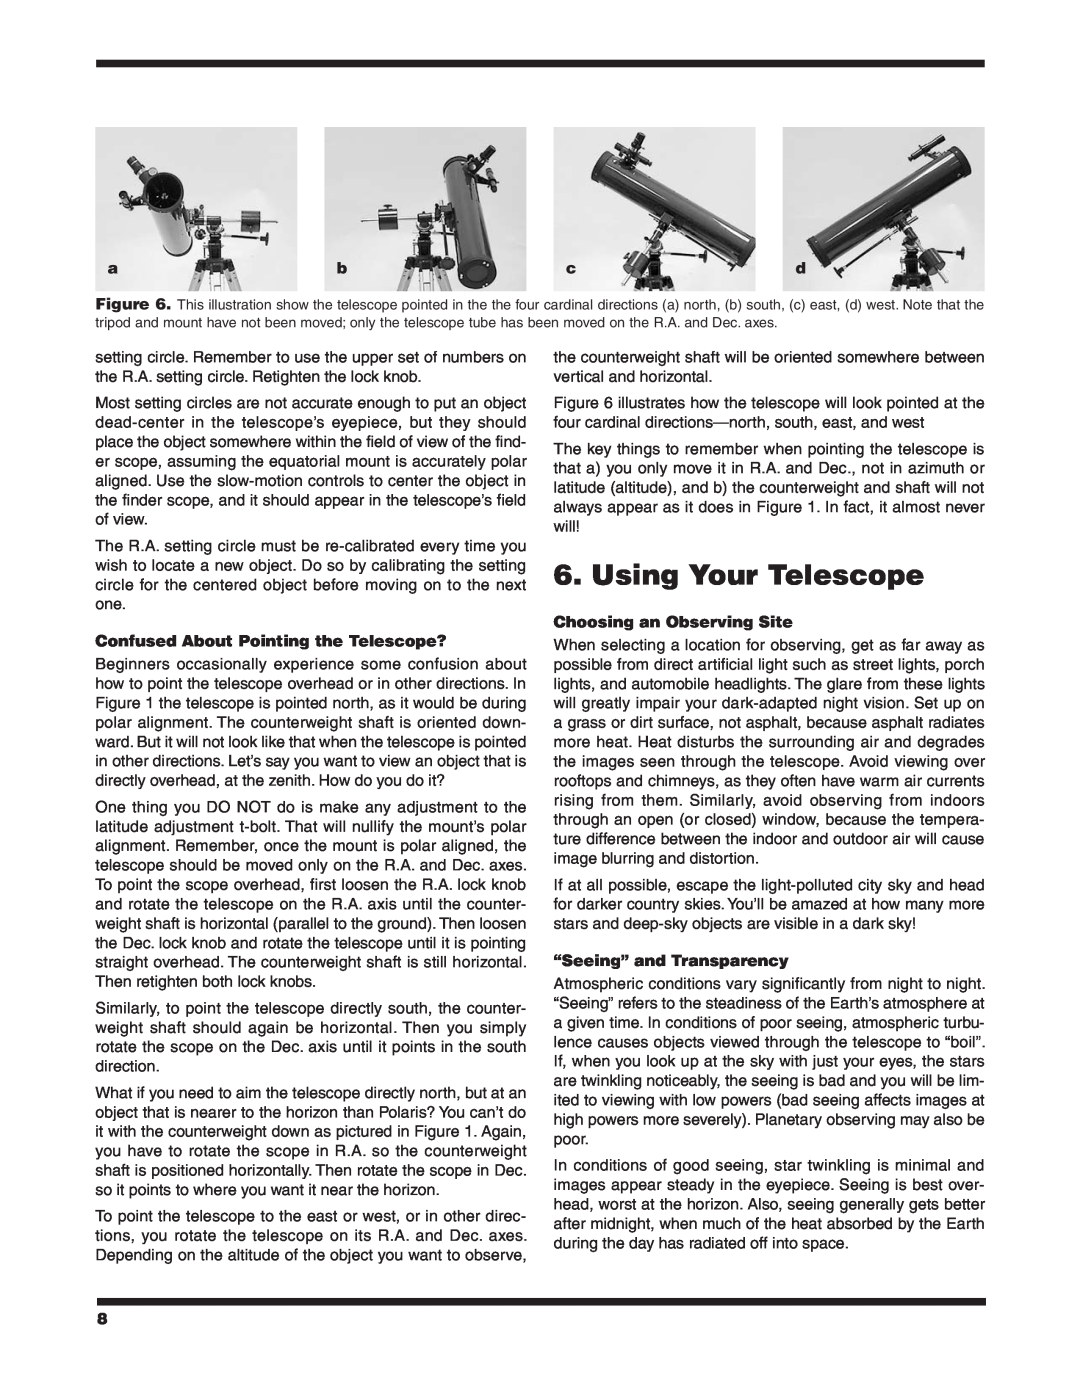 Orion 9843 instruction manual Using Your Telescope, Confused About Pointing the Telescope?, Choosing an Observing Site 